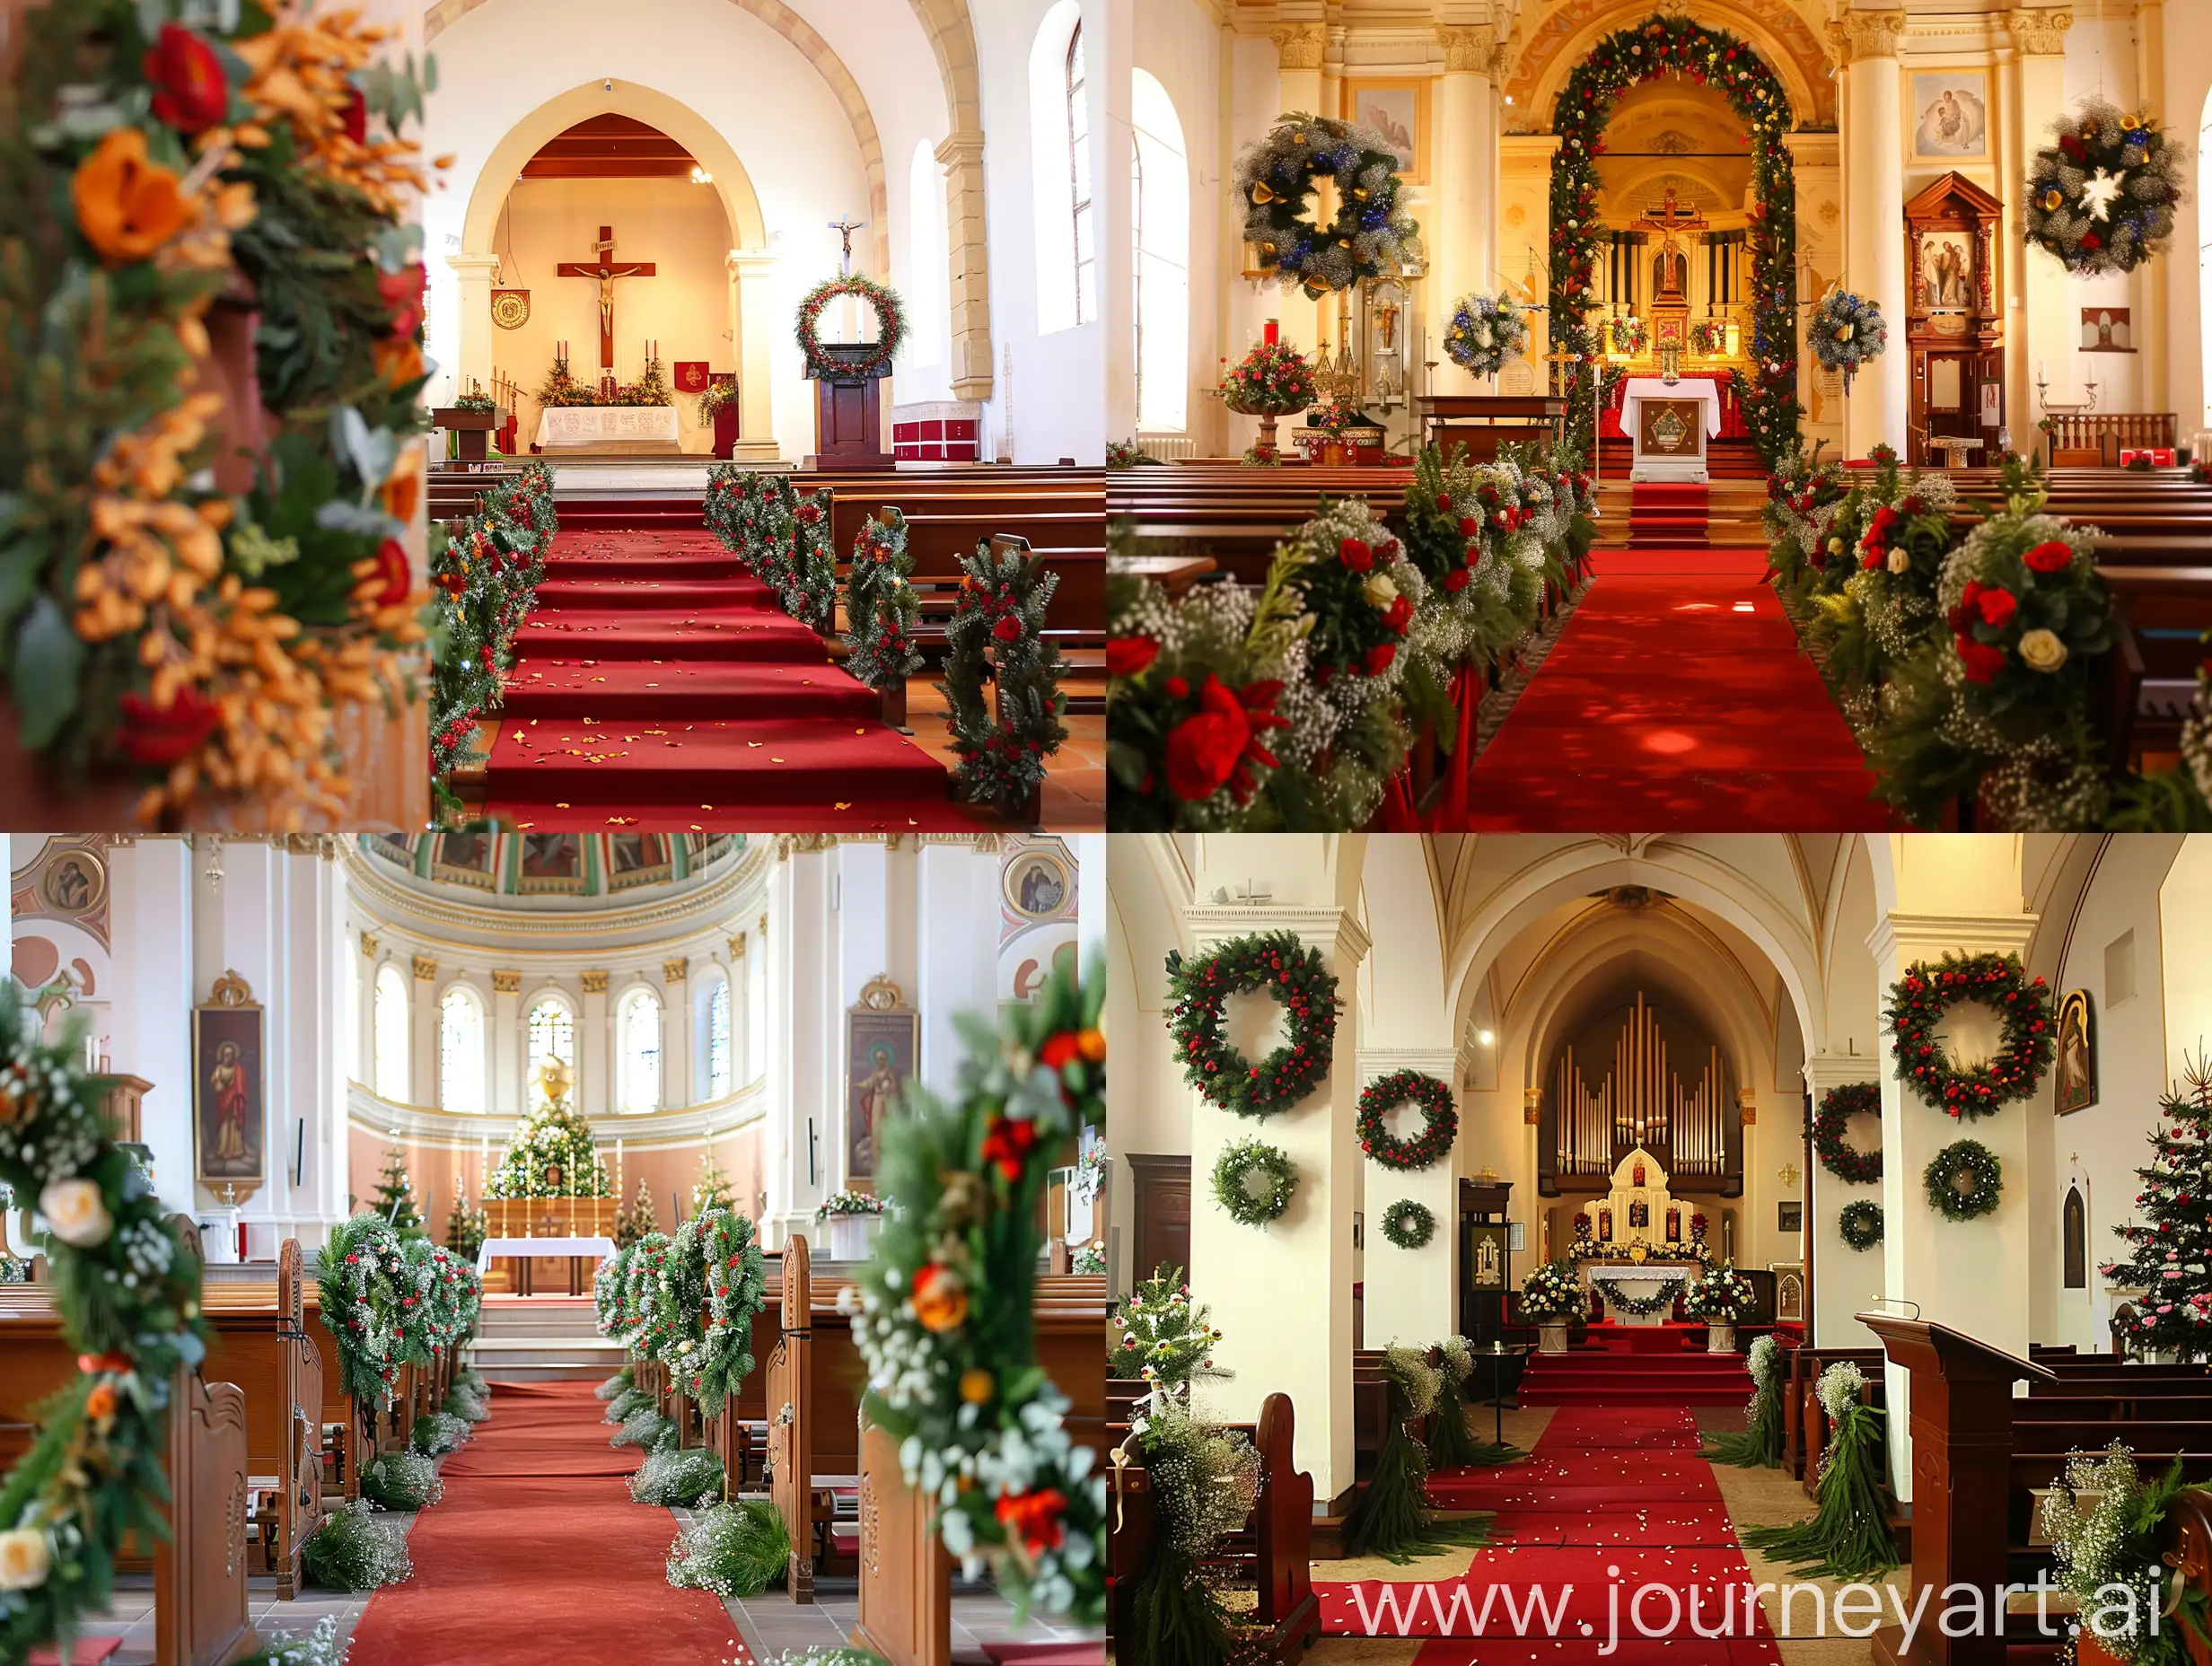 an interior of a beautiful church, with wreaths and flowers, red carpets, before the podium